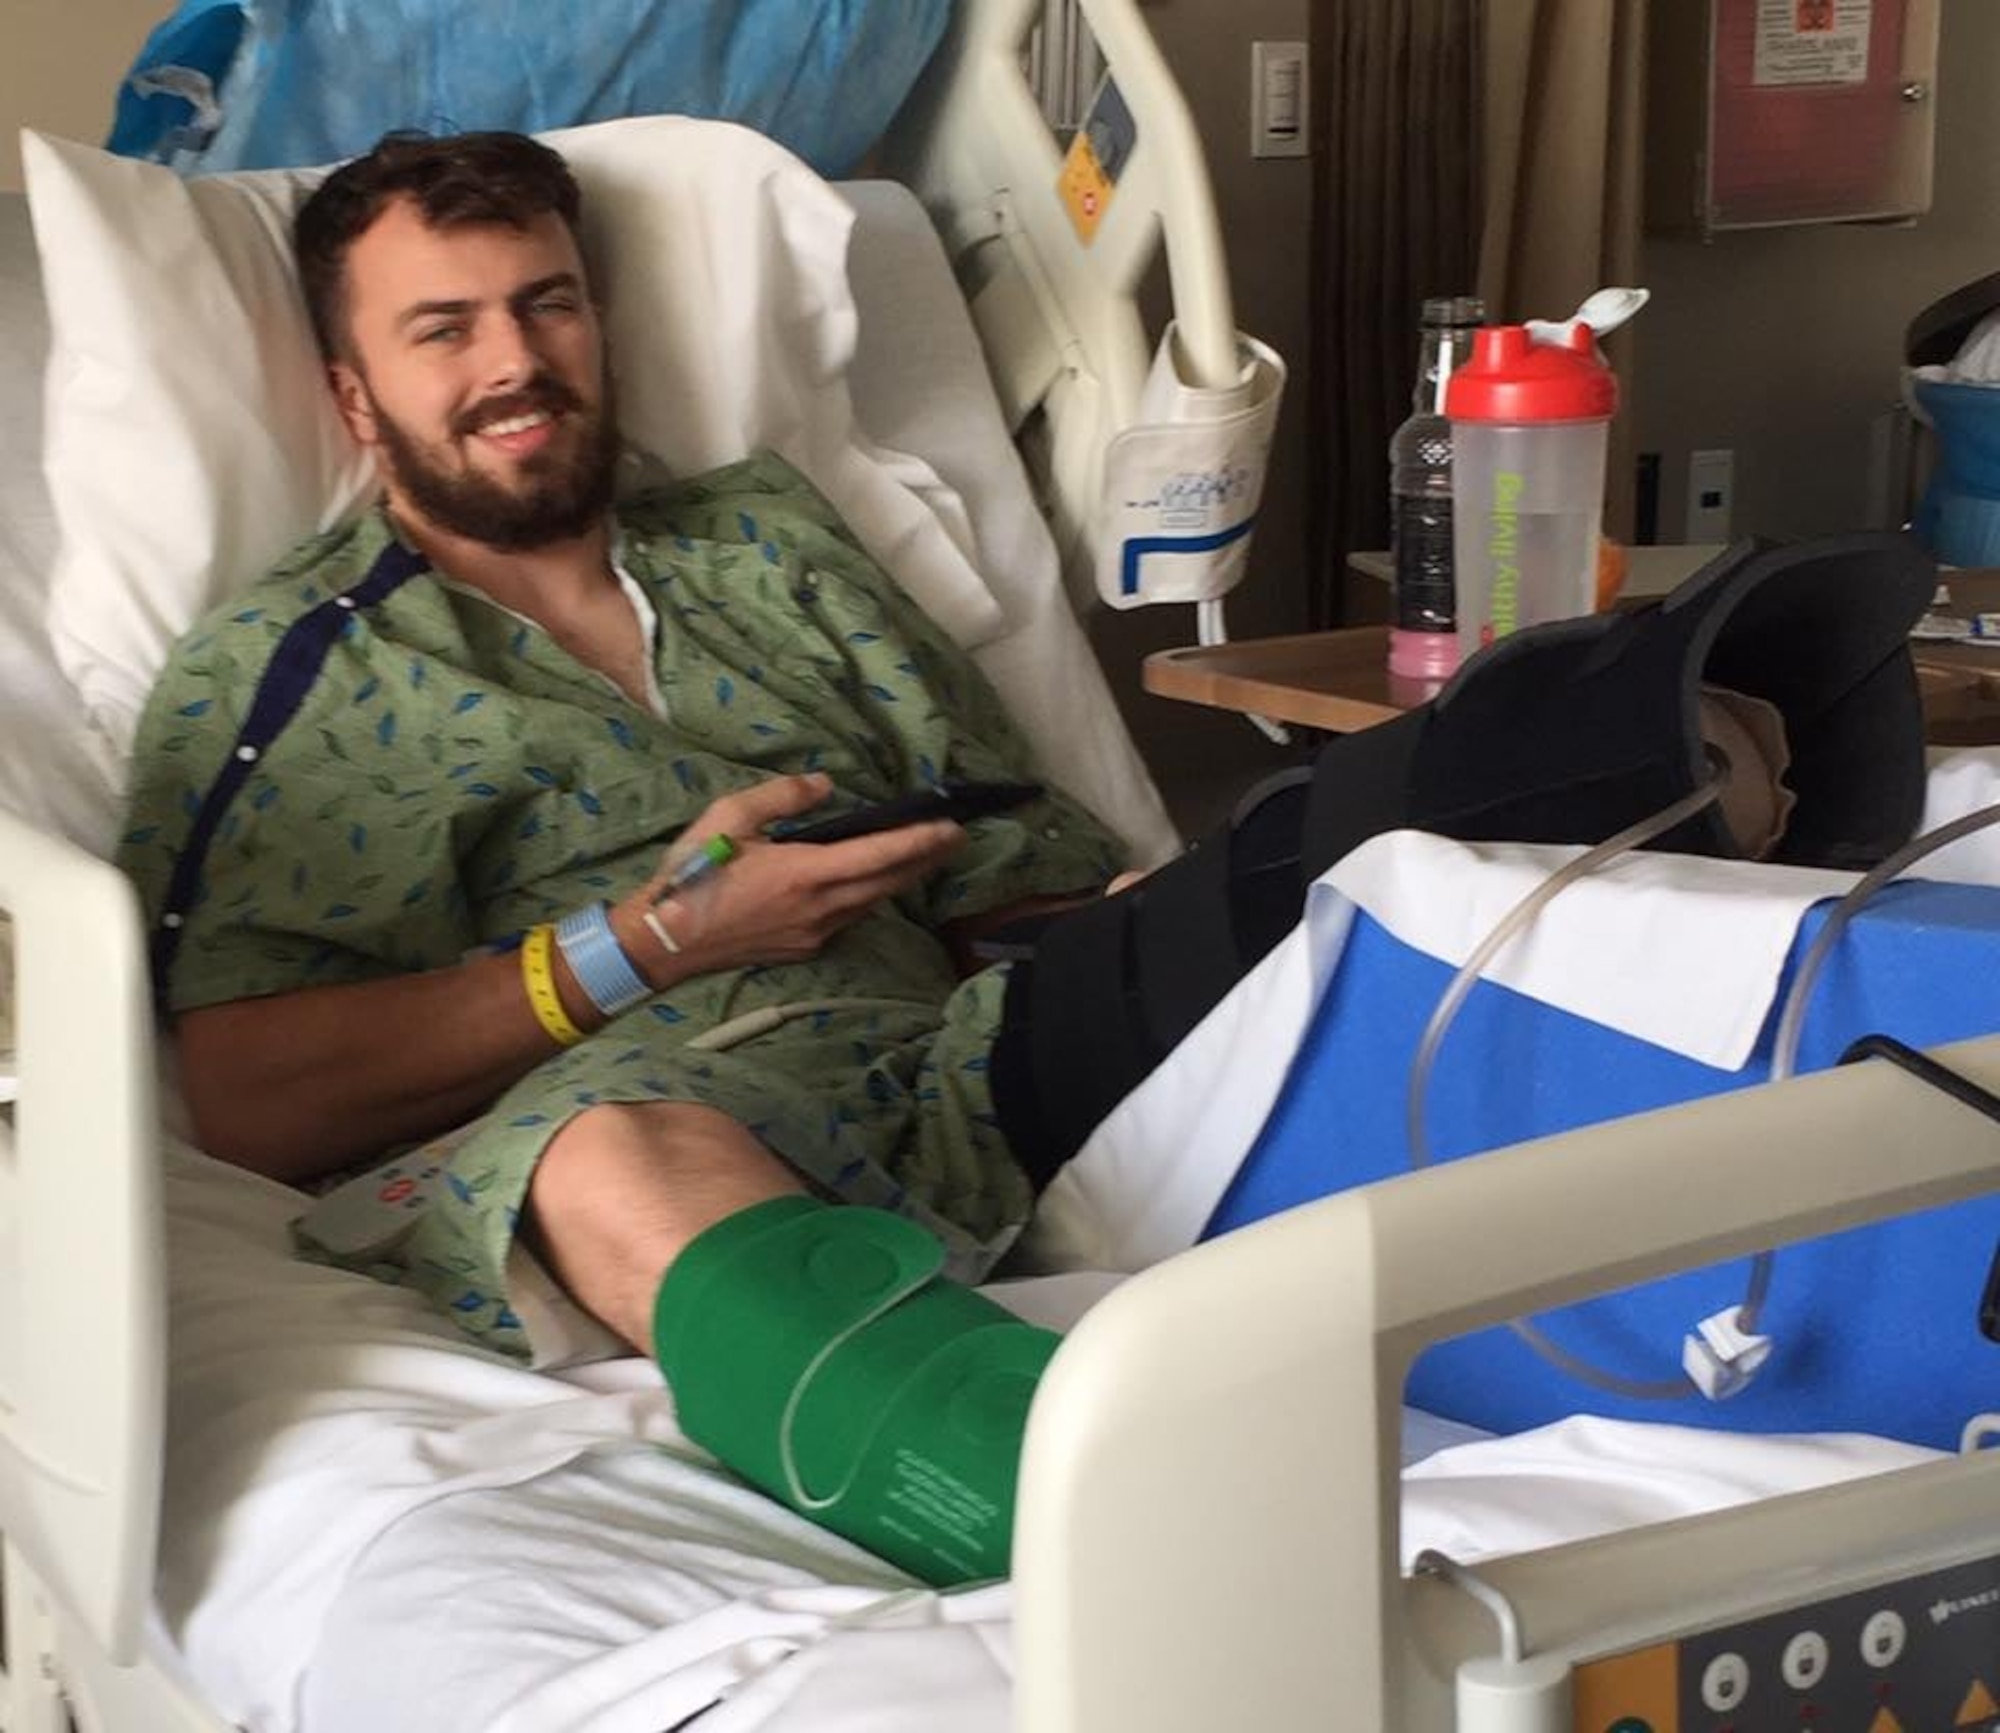 Staff Sgt. Stuart Martin, 68th Airlift Squadron loadmaster, laying in a hospital bed between surgeries at the University Hospital in San Antonio after his left leg was amputated following a motorcycle accident in May 2017. (Courtesy photo)